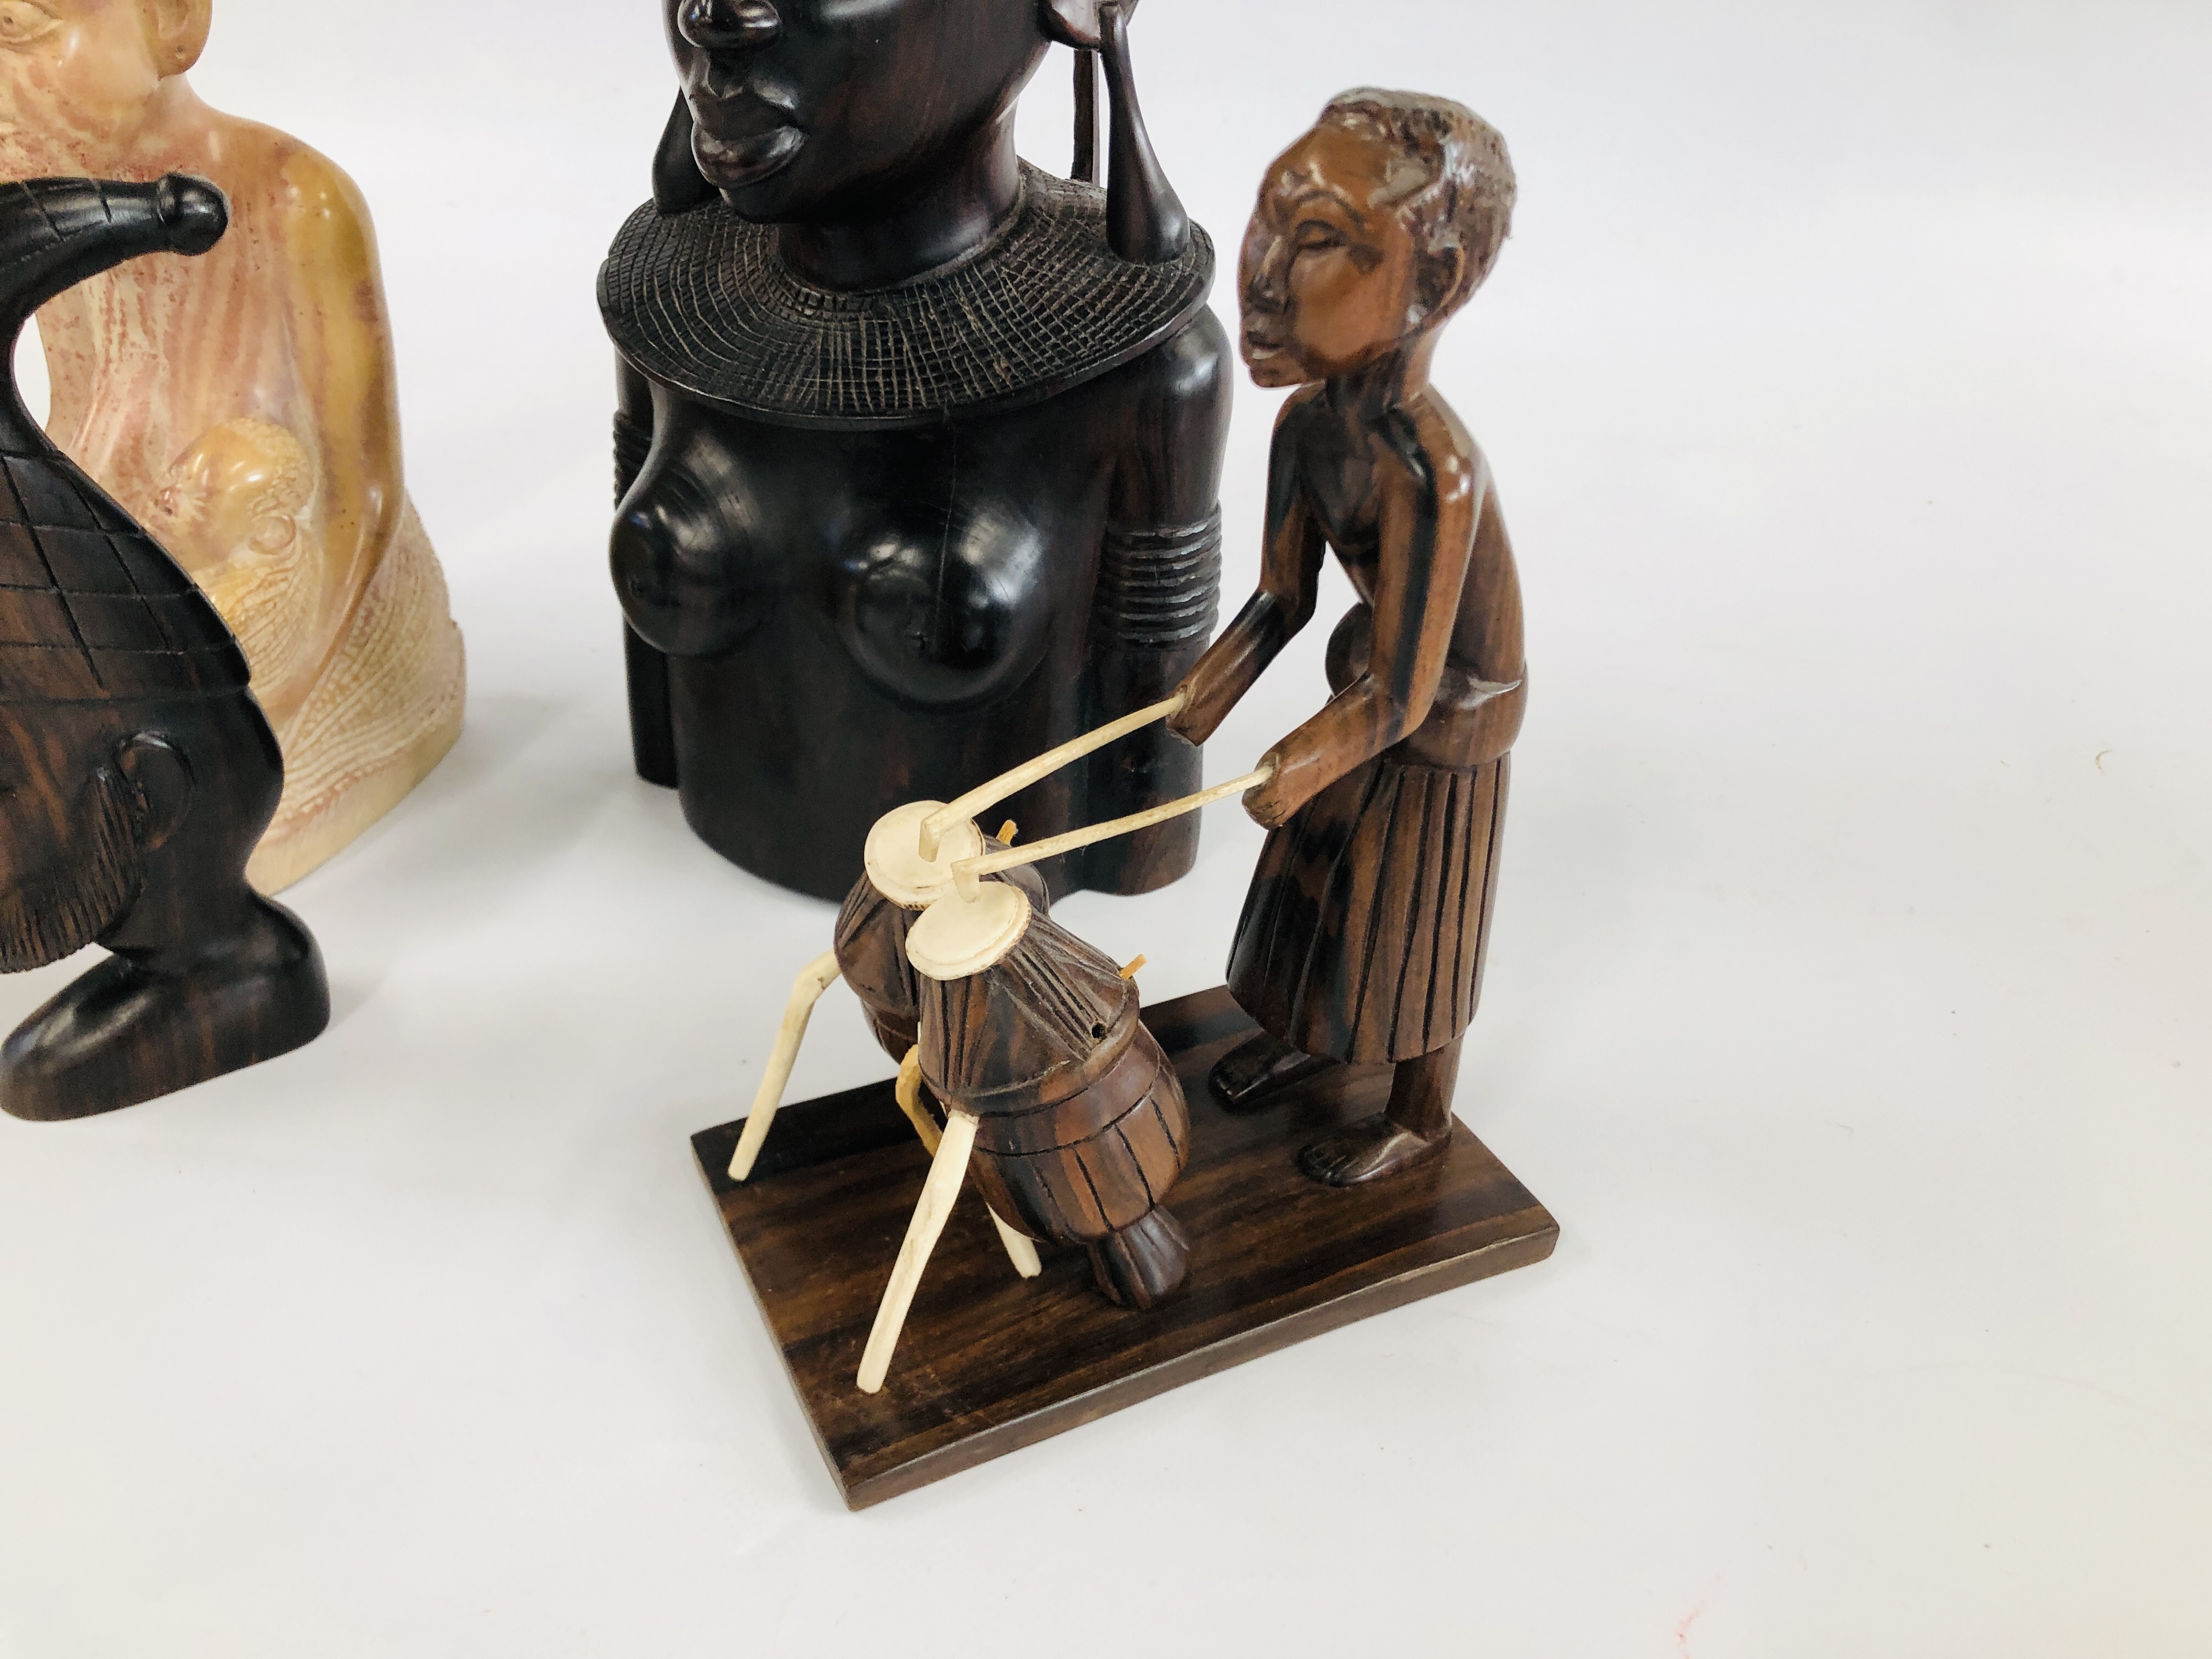 A HARD WOOD AFRICAN TRIBAL BUST ALONG WITH A FURTHER TWO FIGURES ONE OF WHICH IS HOLDING A NEW BORN - Image 2 of 5